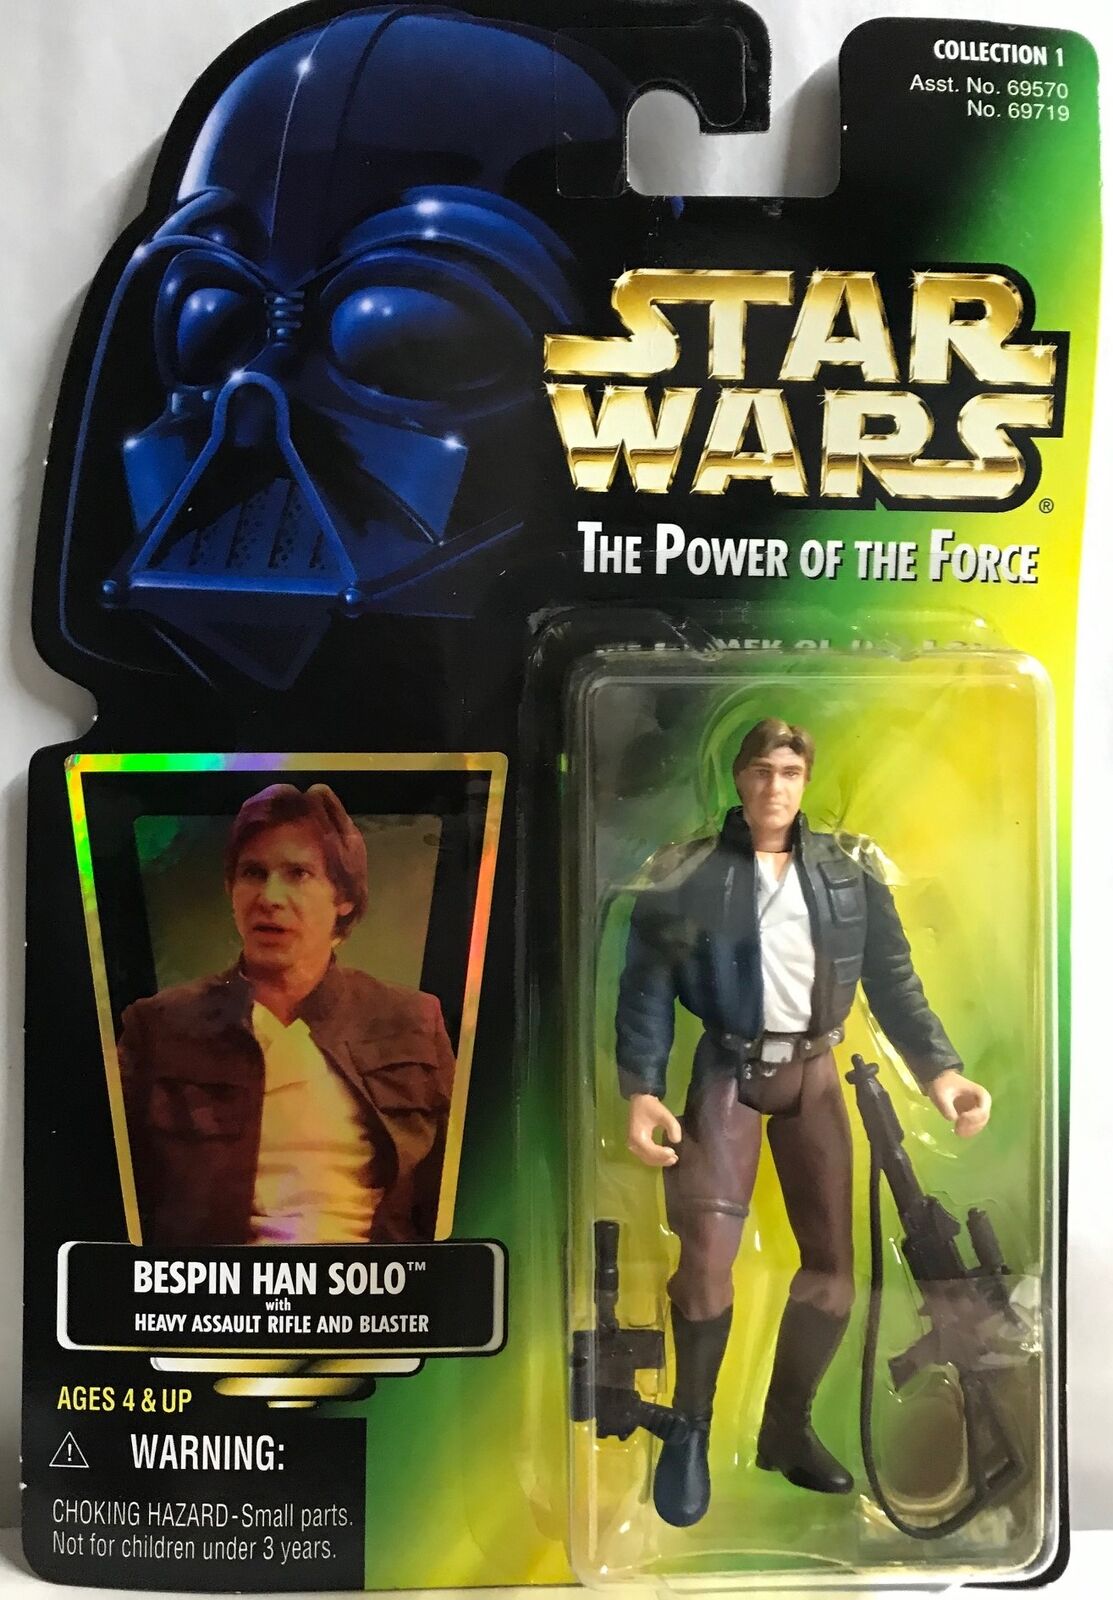 STAR WARS - KENNER - POTF - BESPIN HAN SOLO - with Heavy Assault Rifle and Blaster